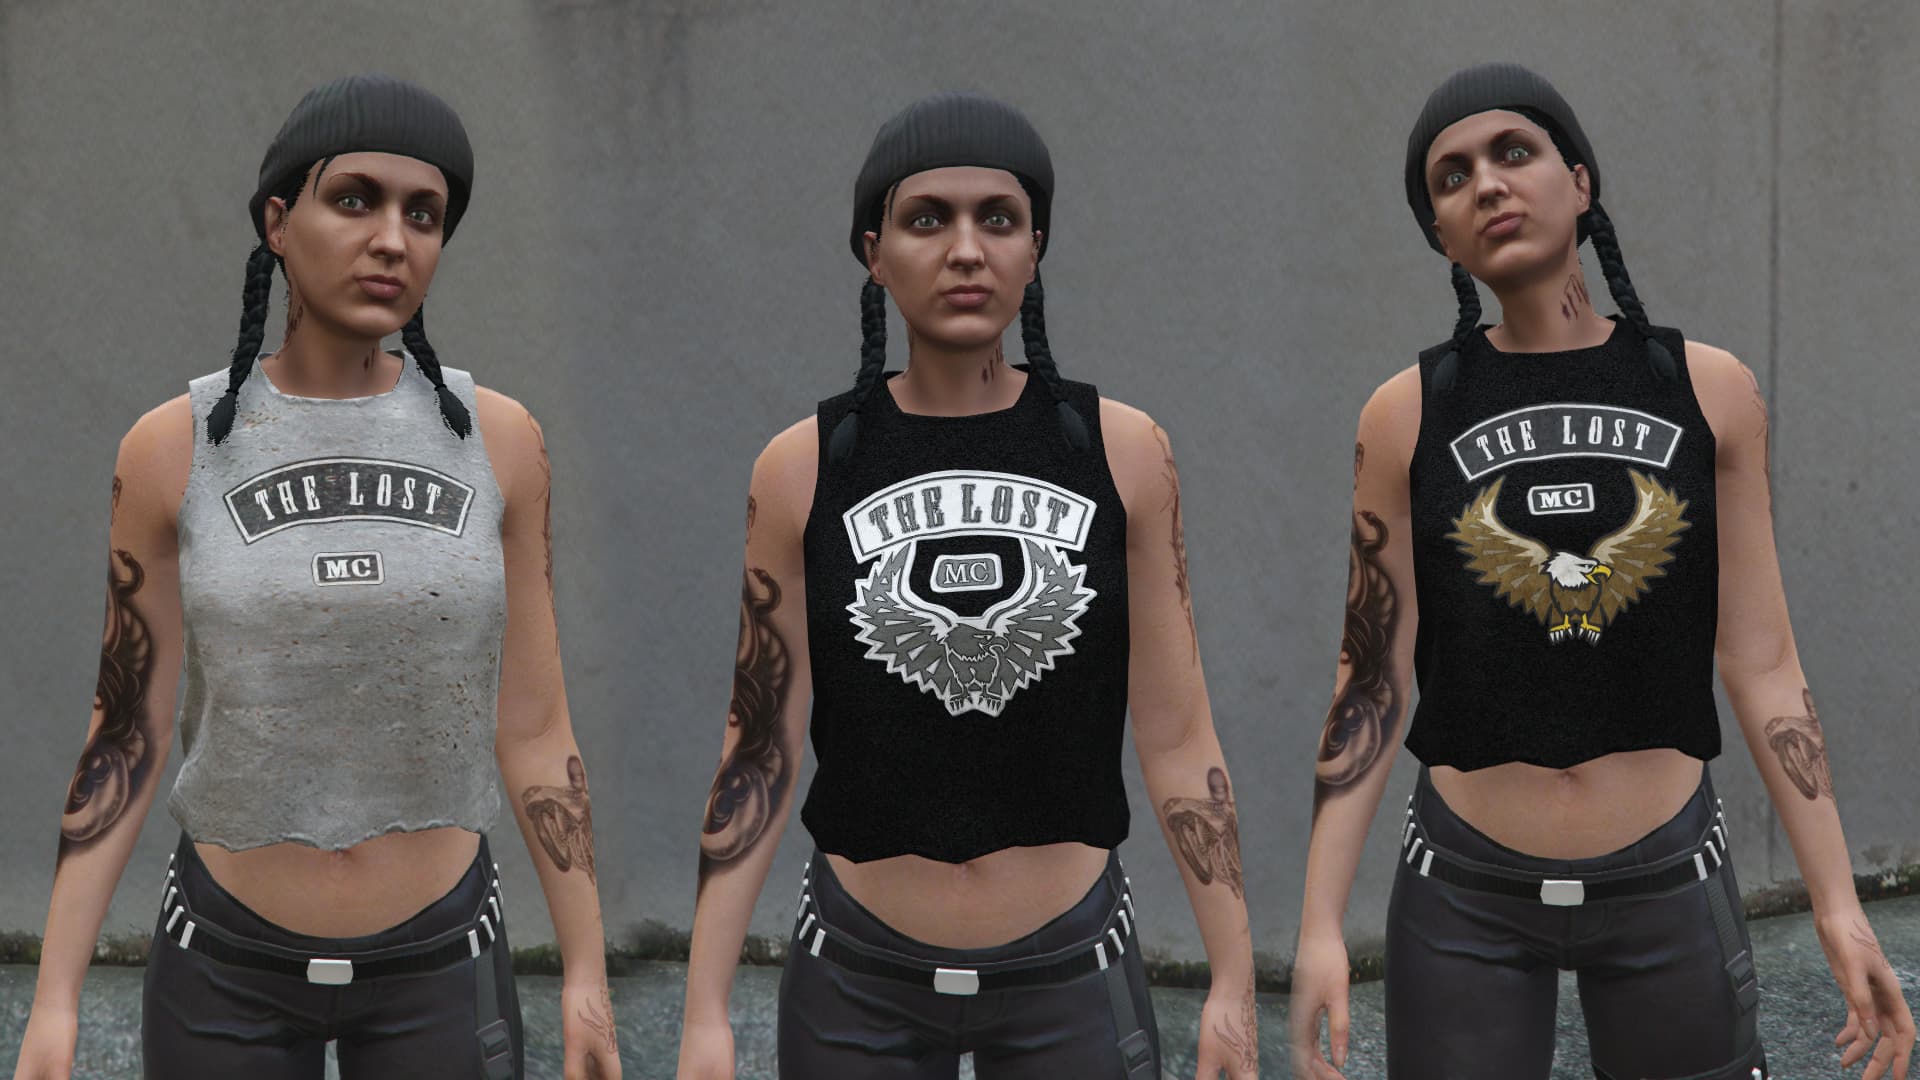 [PAID][CLOTHING] The Lost MC (Female Version) - Releases - Cfx.re Community